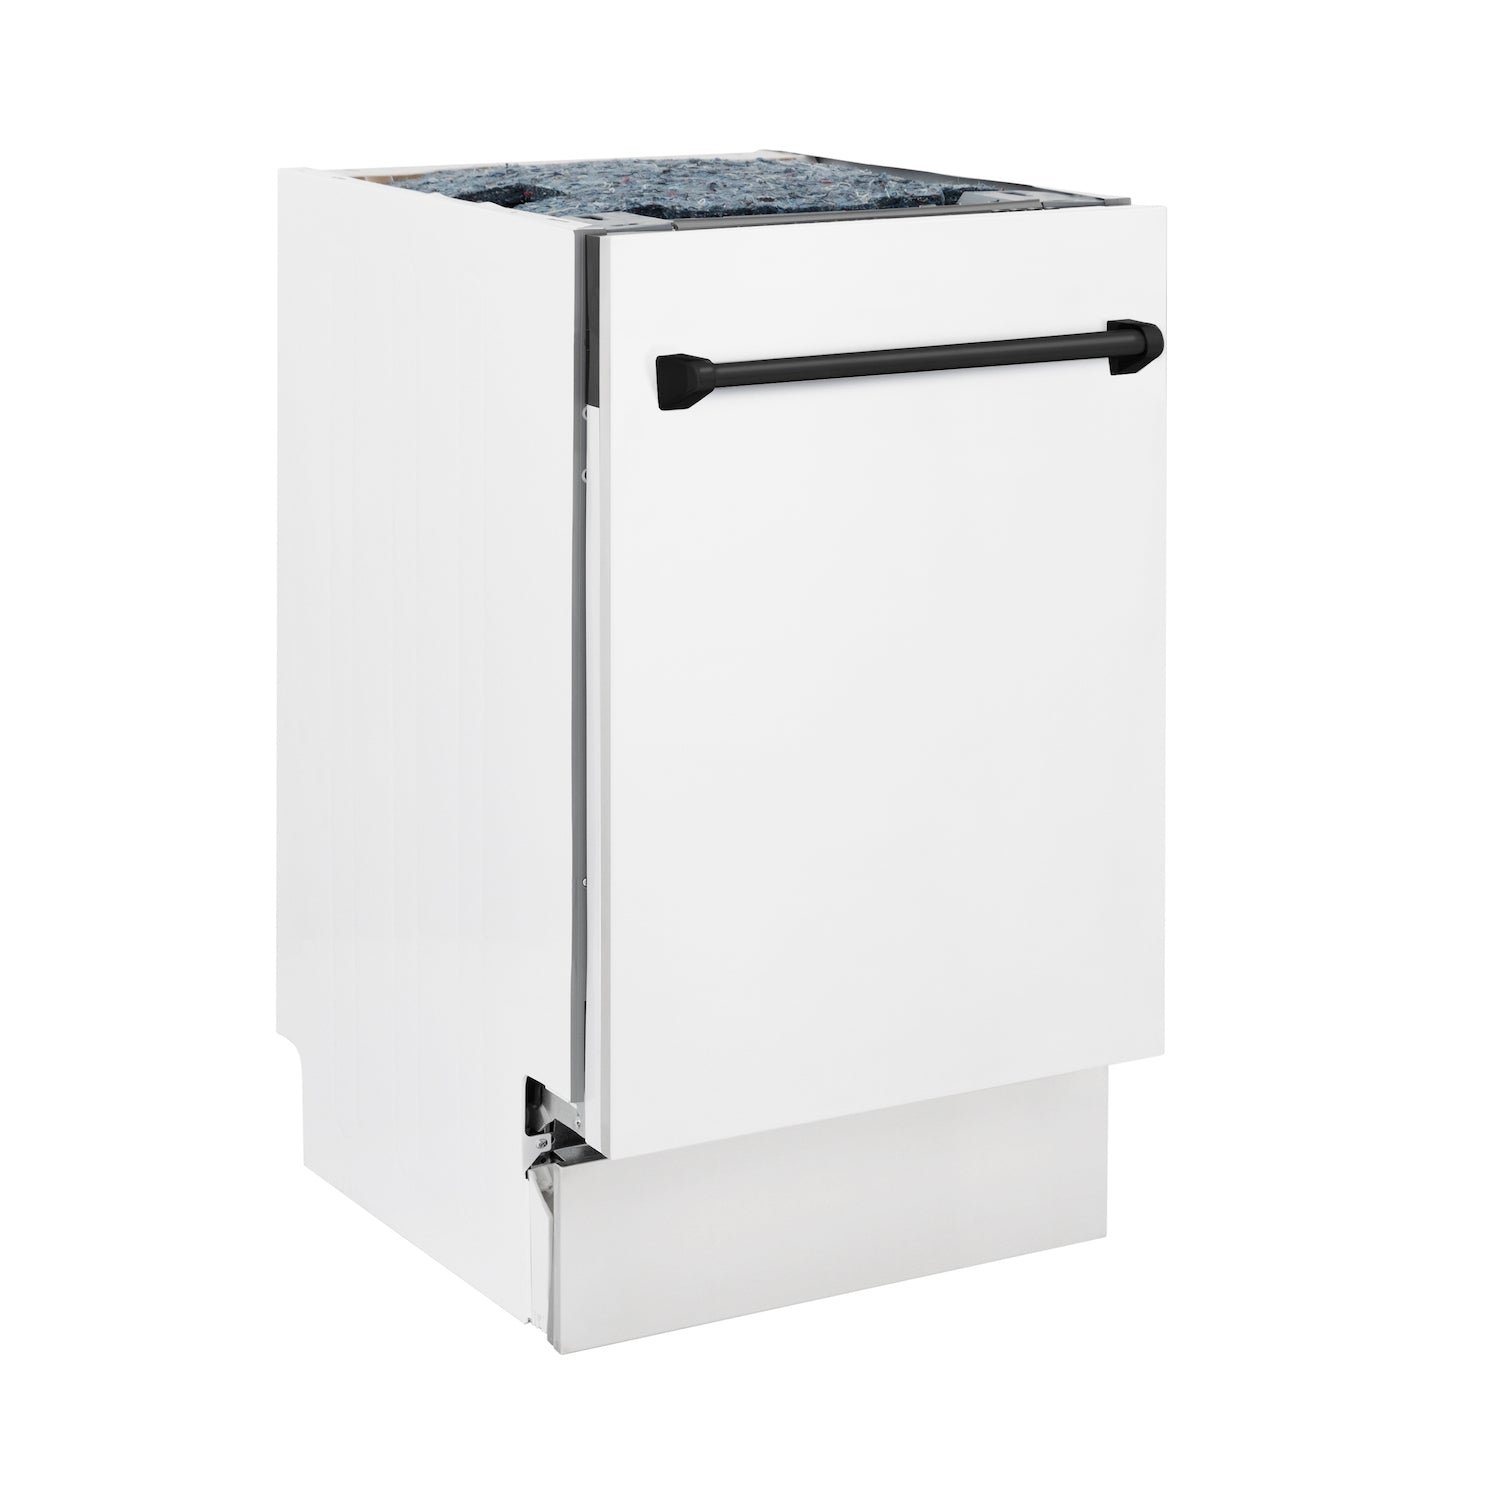 ZLINE Autograph Edition 18 in. Tallac Series 3rd Rack Top Control Built-In Dishwasher in White Matte with Matte Black Handle, 51dBa (DWVZ-WM-18-MB) front, closed.